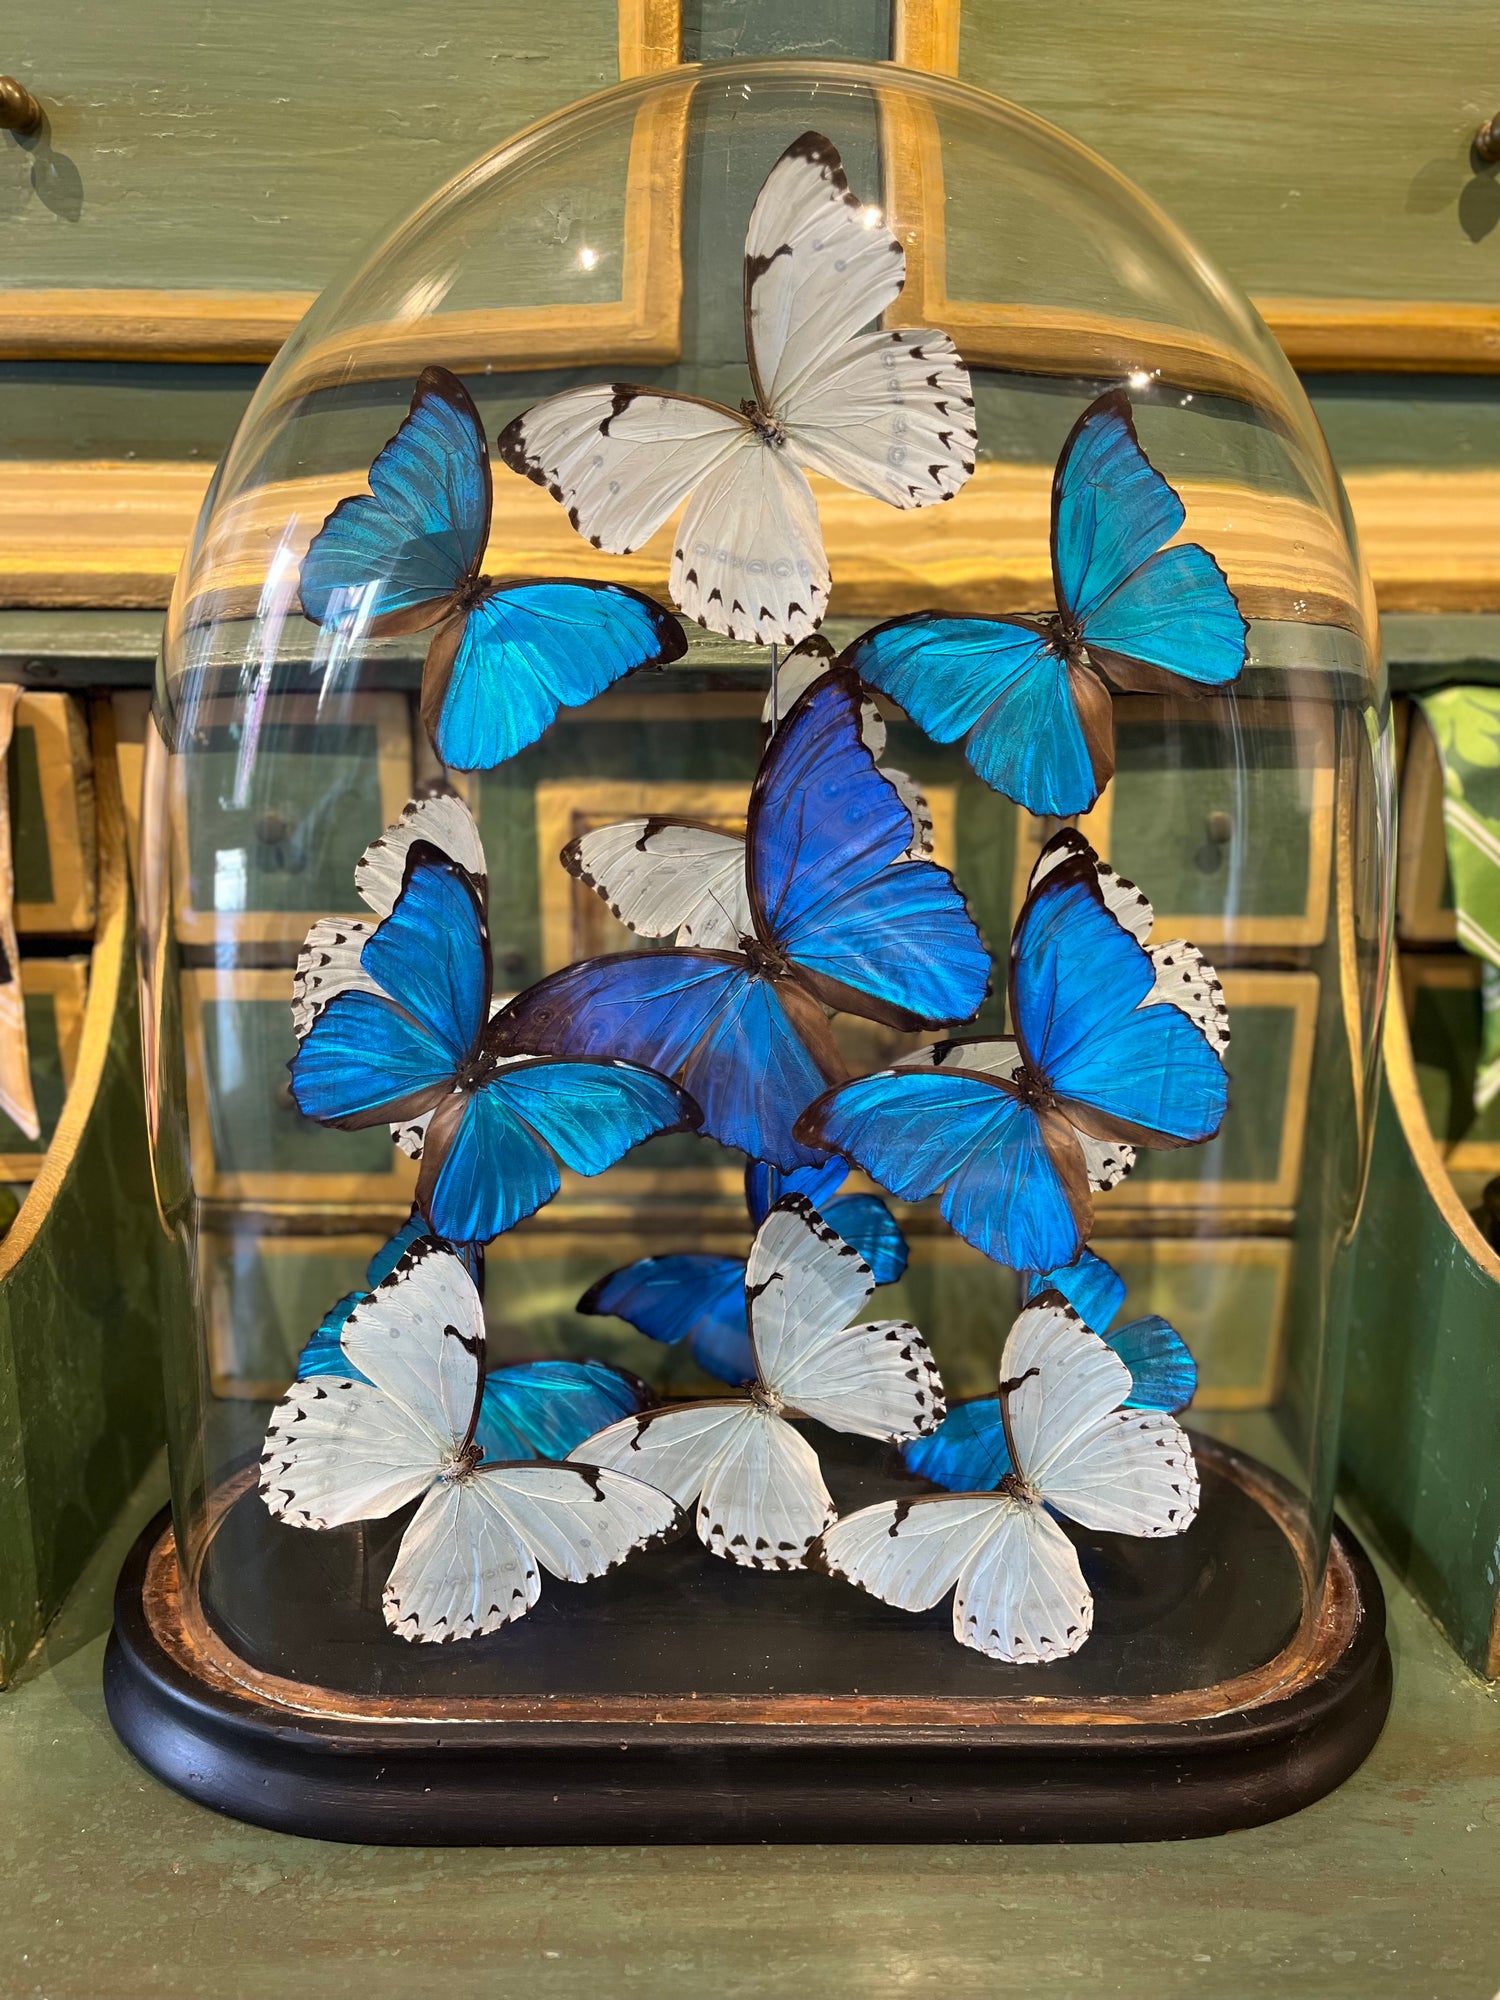 White Morpho Catenarius and Blue Morphos Butterflies in Antique Oval Dome